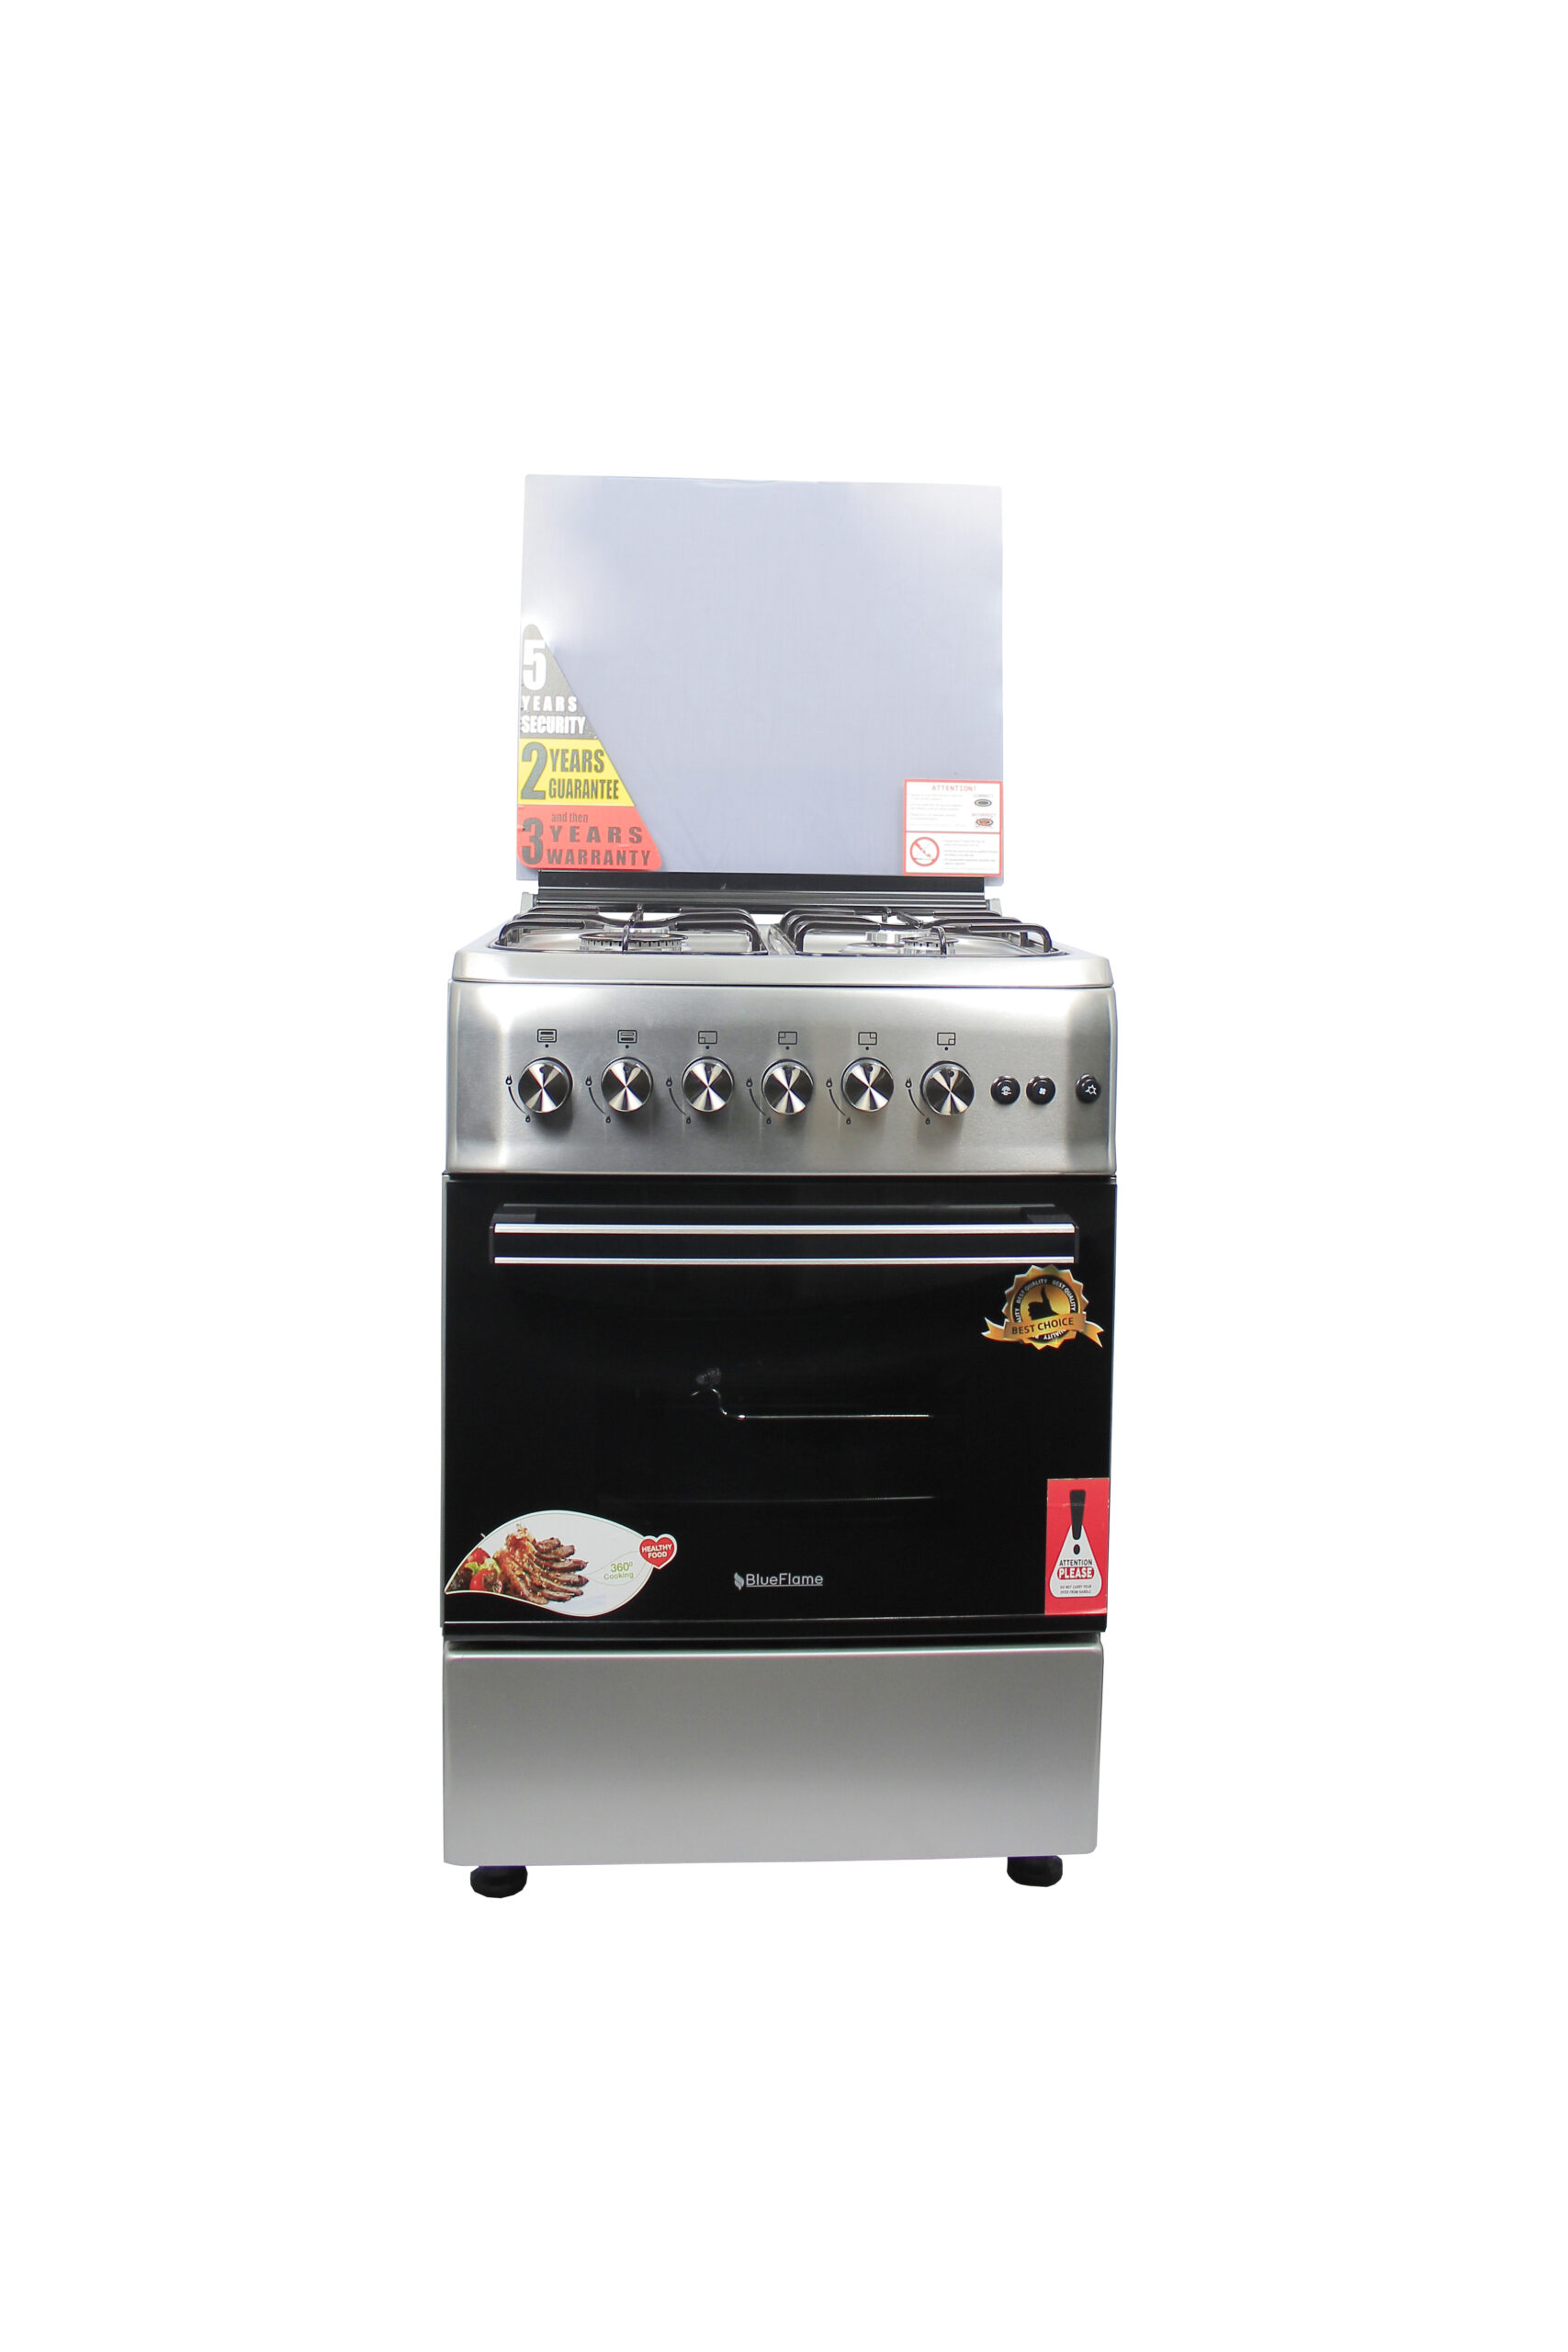 Blueflame Full Gas Cooker 60 By 60 Cm S6040GRFP With Gas Oven & Grill,  Turbo Fan, Automatic Ignition, Rotisserie, Glass Cover, Oven Lamp - Inox -  TilyExpress Uganda